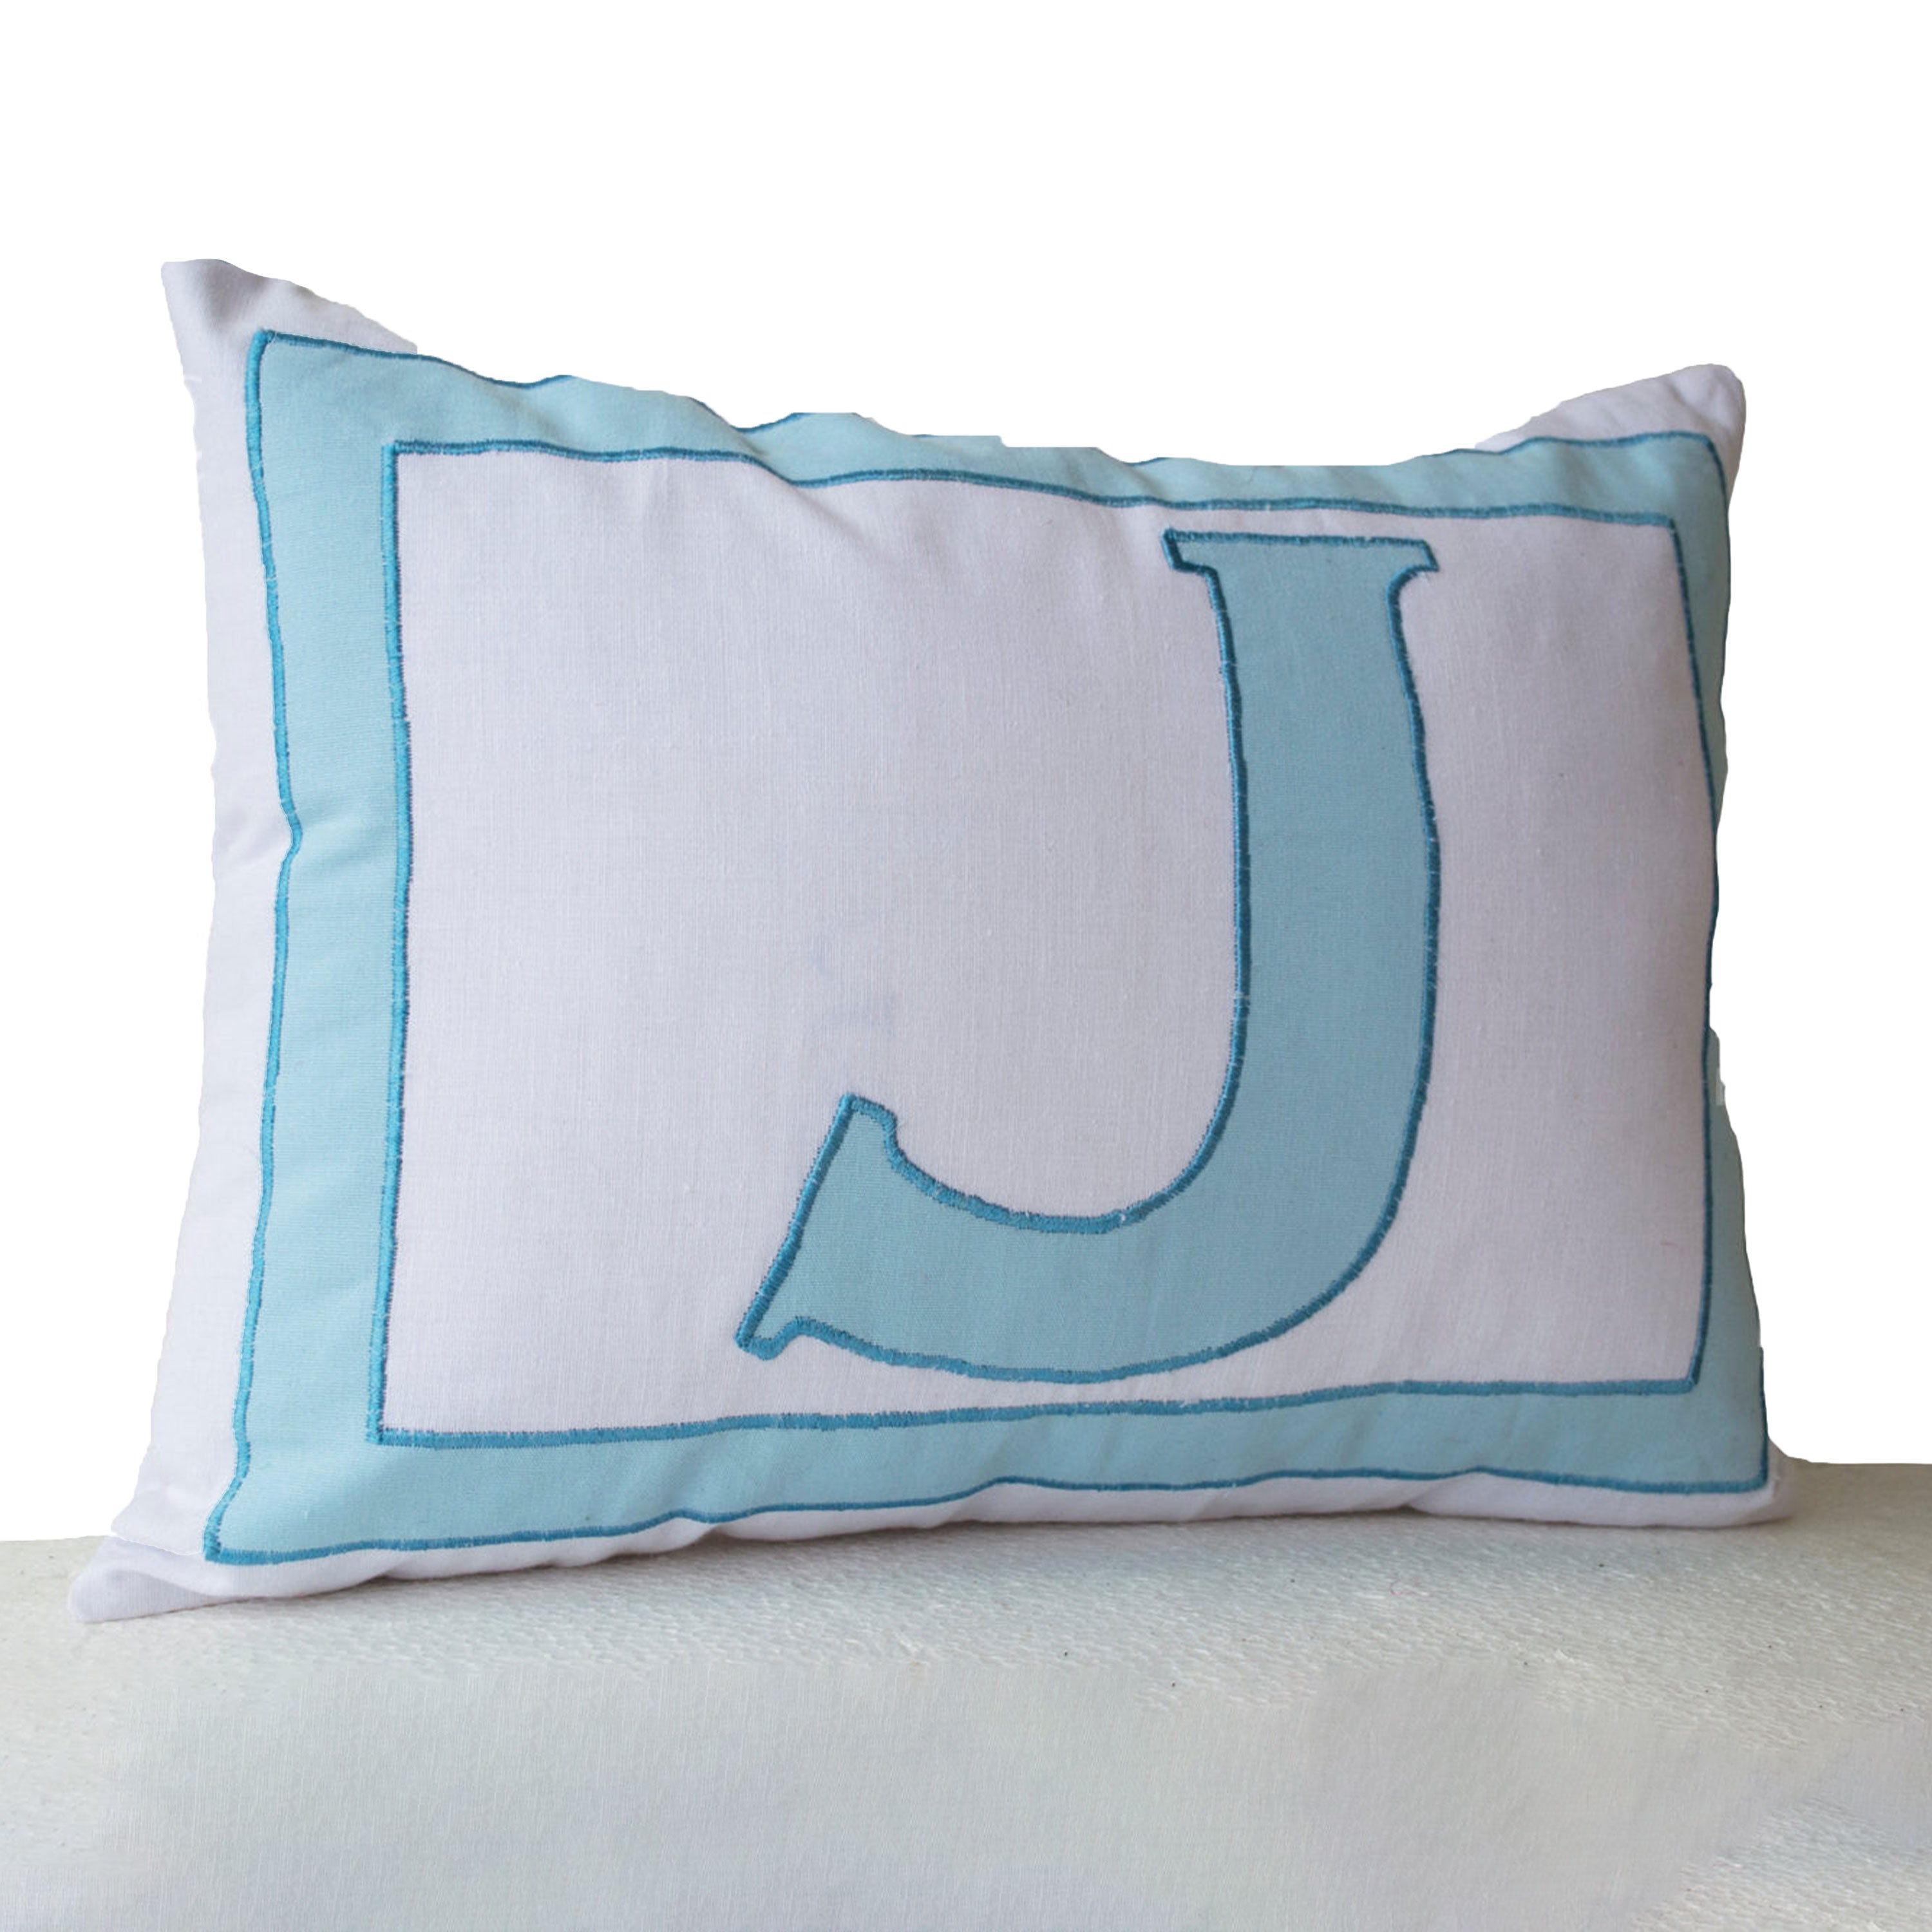 Monogram Pillows -Personalized White Blue letter pillow cover- Alphabet throw pillow- Customized letter cushions- Cotton pillow- Gift- 12x16